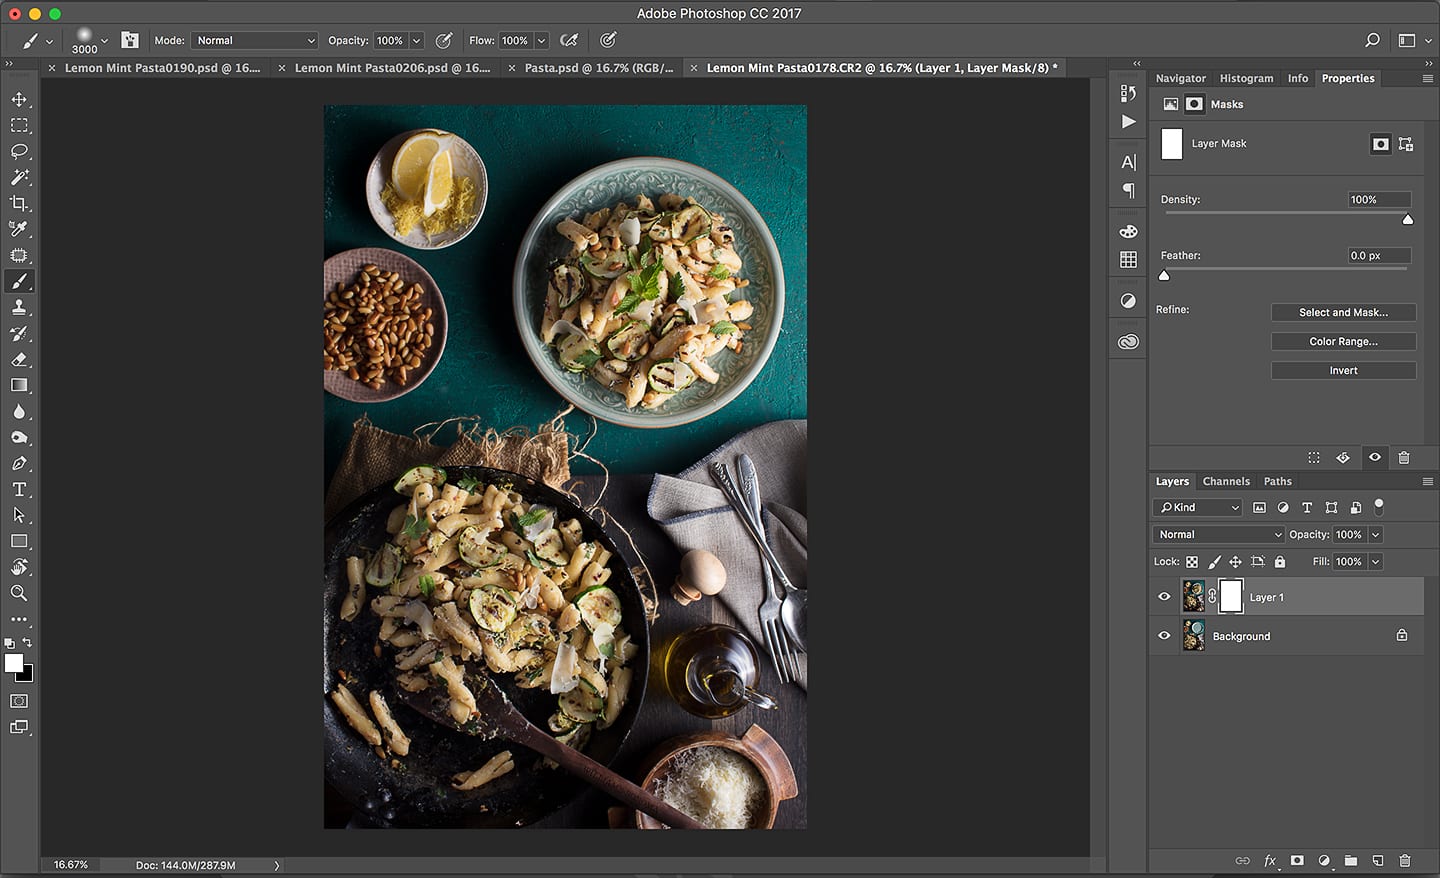 Not Enough Food? 4 Simple Photoshop Steps To Composite Food Photography - WeEatTogether.com